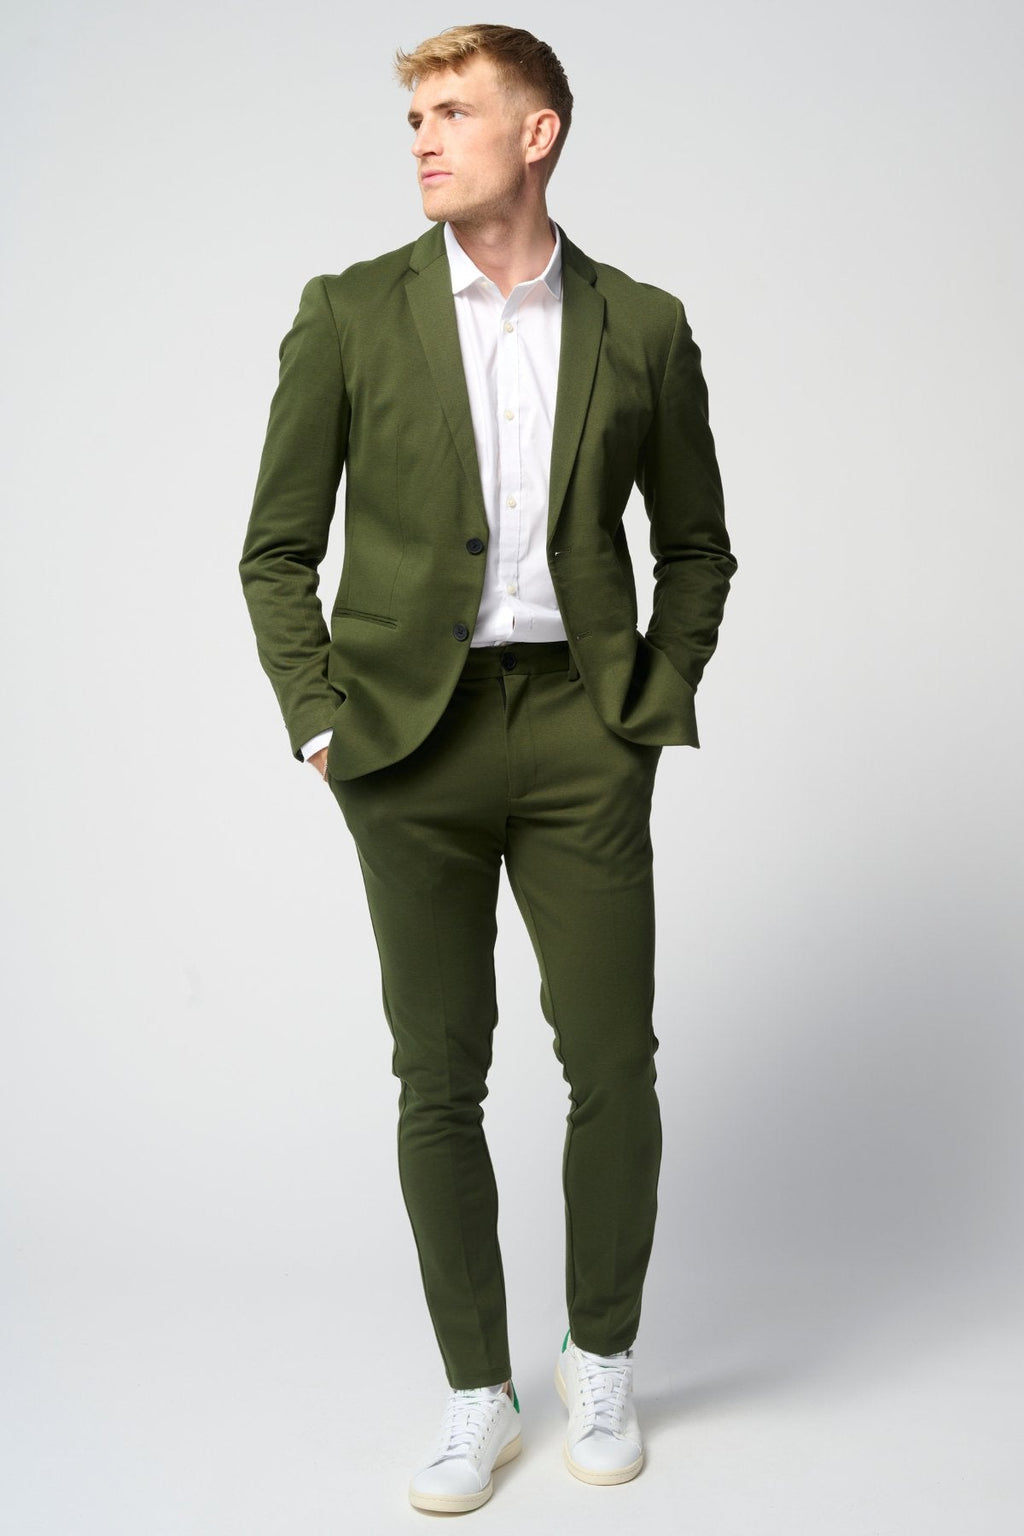 The Original Performance Suit™️ (Dark Green) + Shirt & Tie - Package Deal (V.I.P)